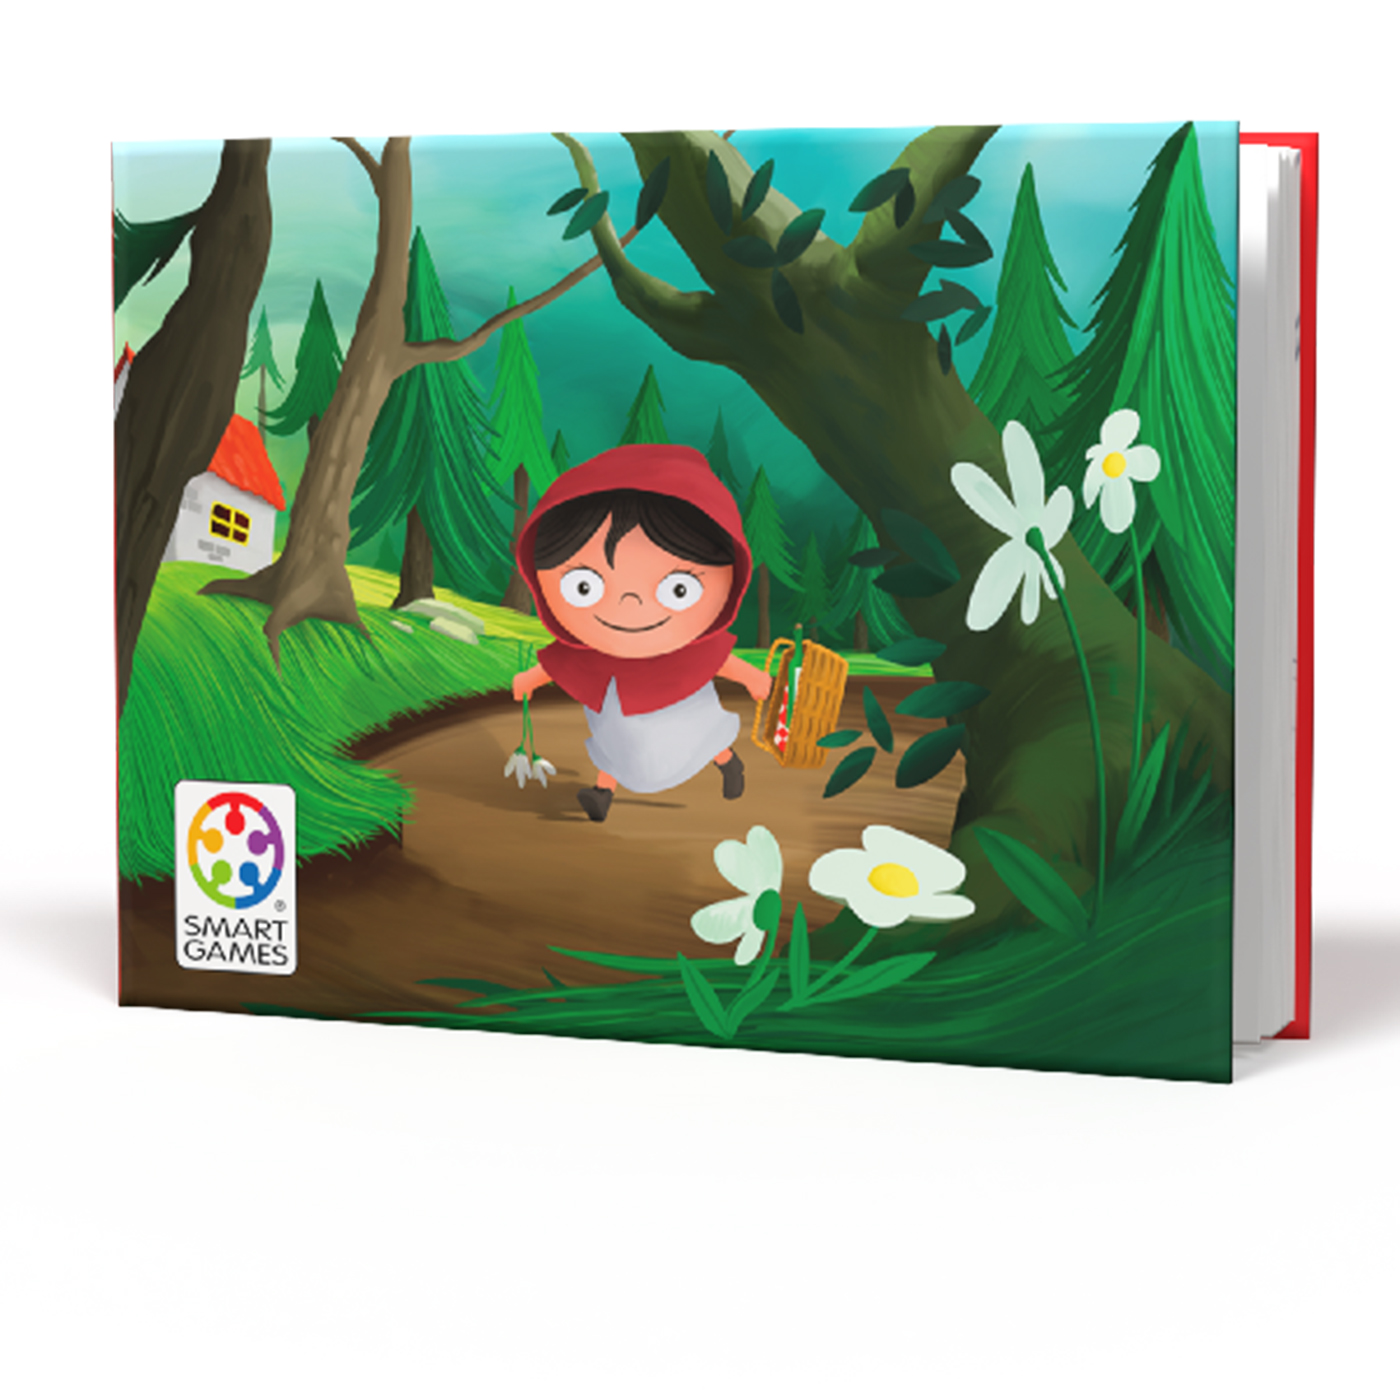 SMART GAMES SmartGames Little Red Riding Hood